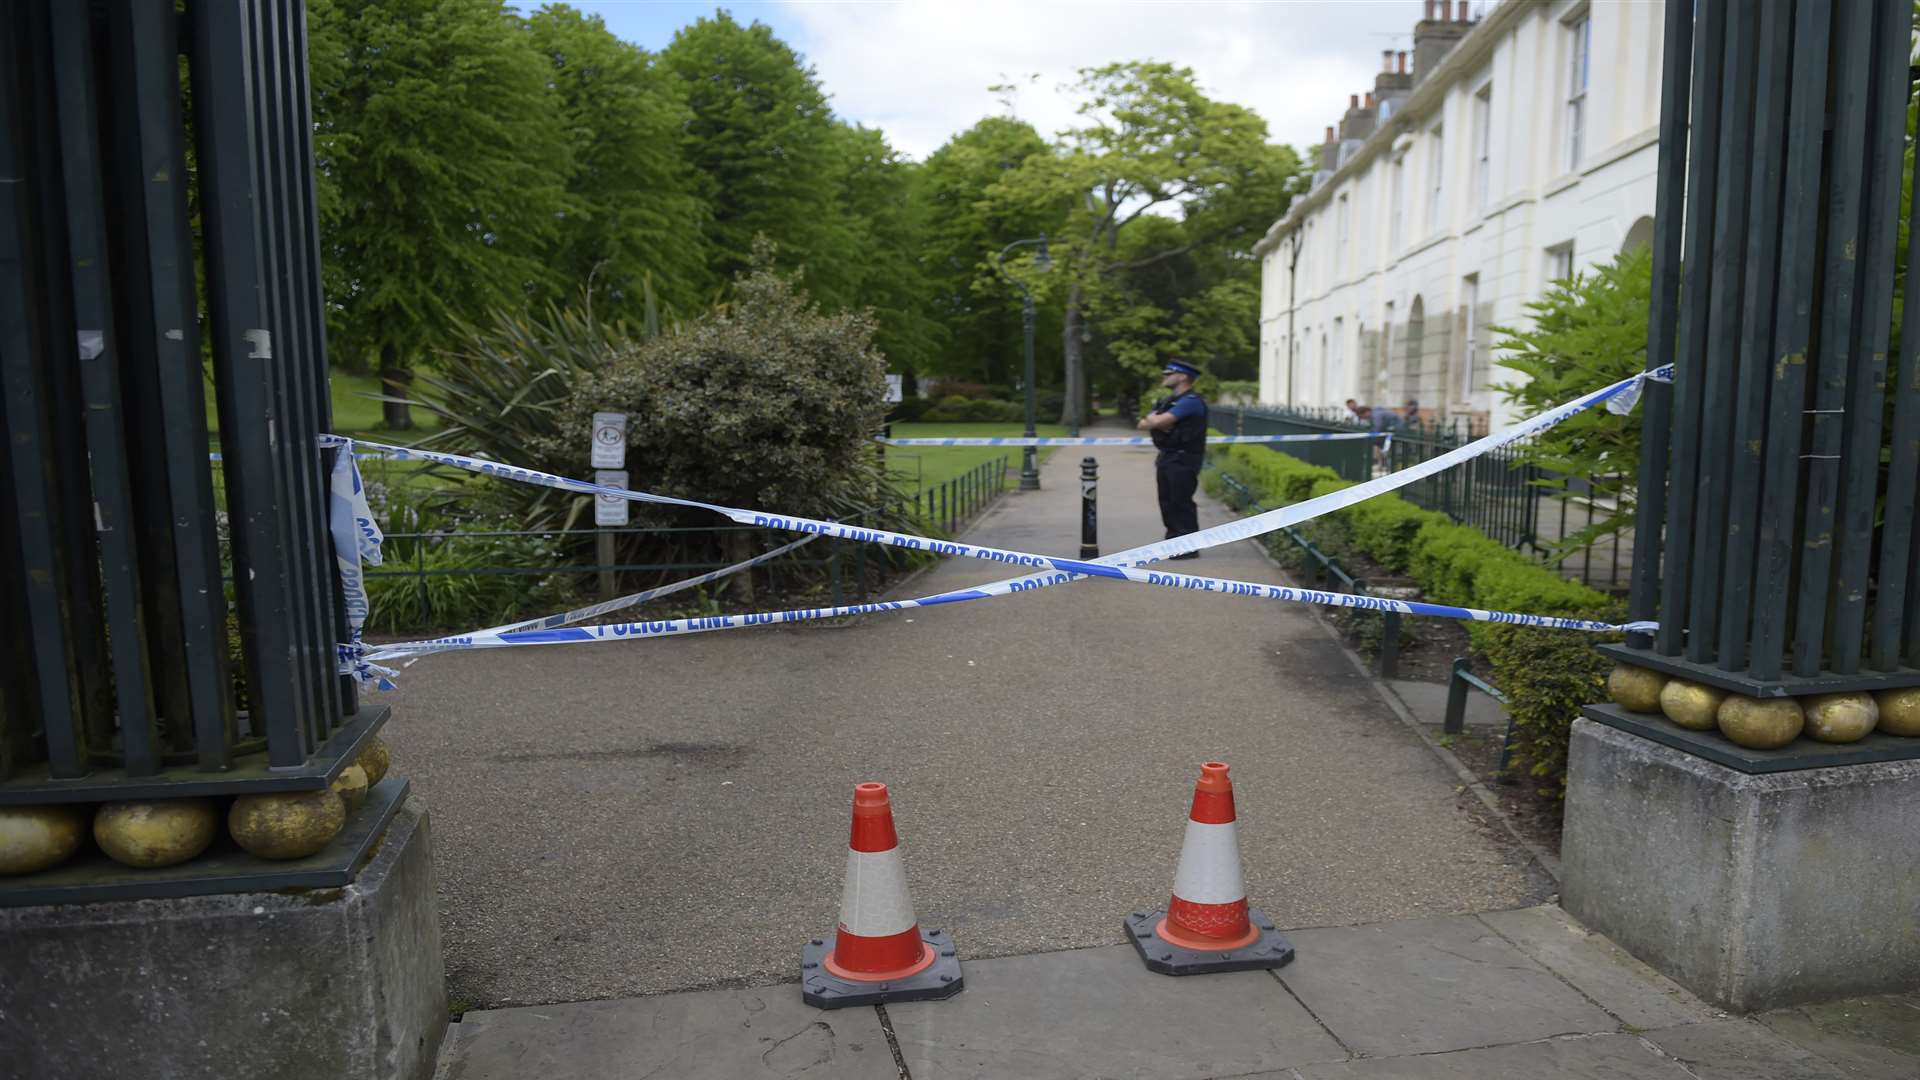 The gardens were taped off